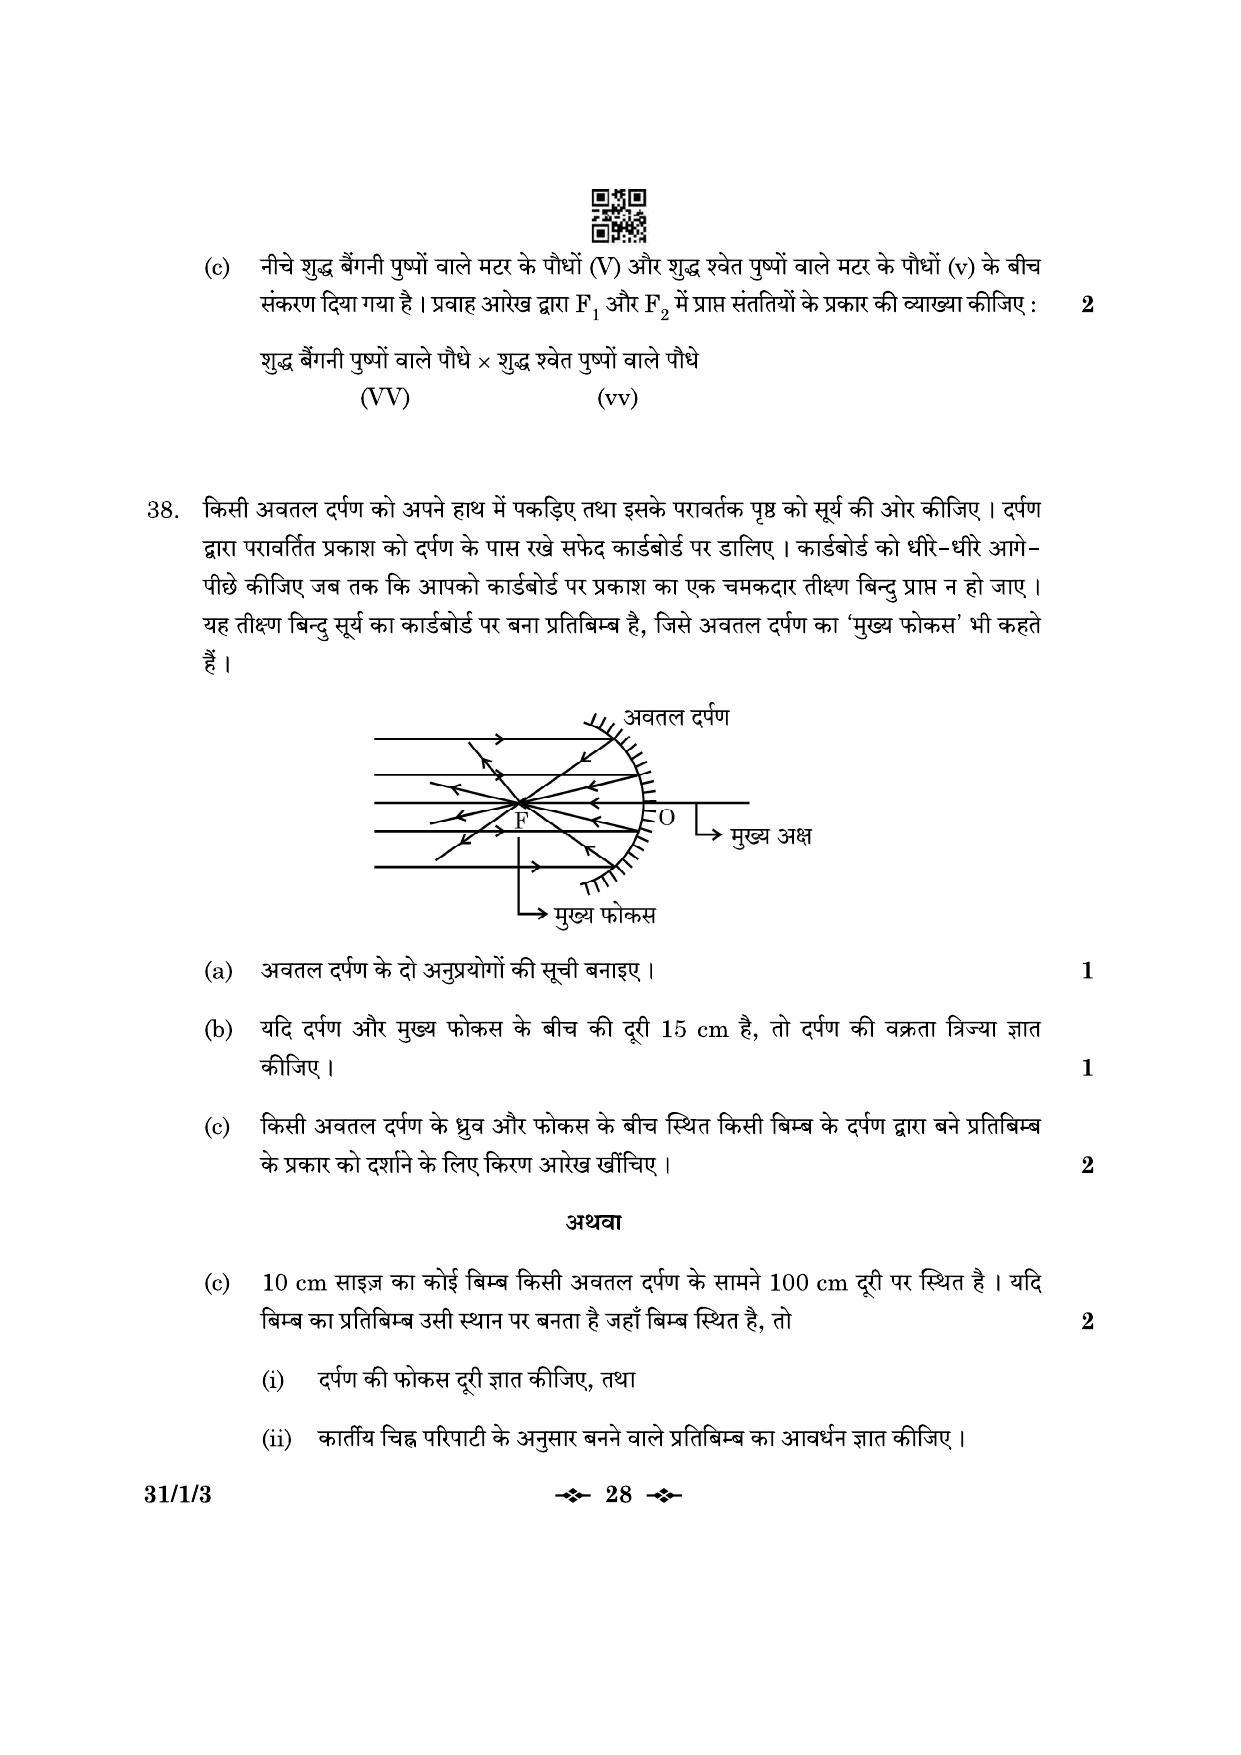 CBSE Class 10 31-1-3 Science 2023 Question Paper - Page 28